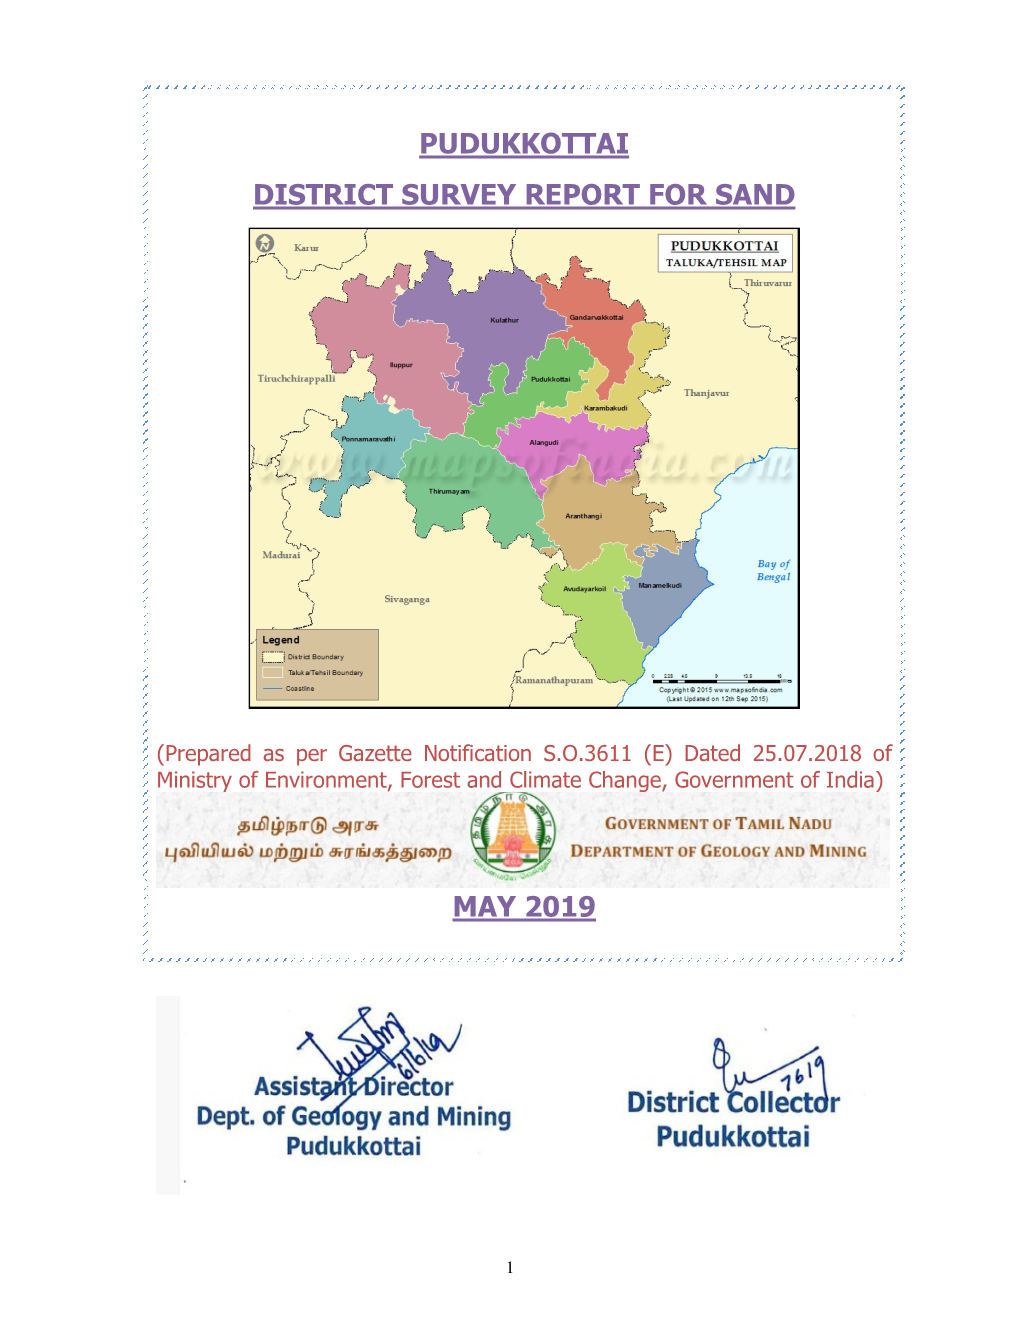 Pudukkottai District Survey Report for Sand May 2019